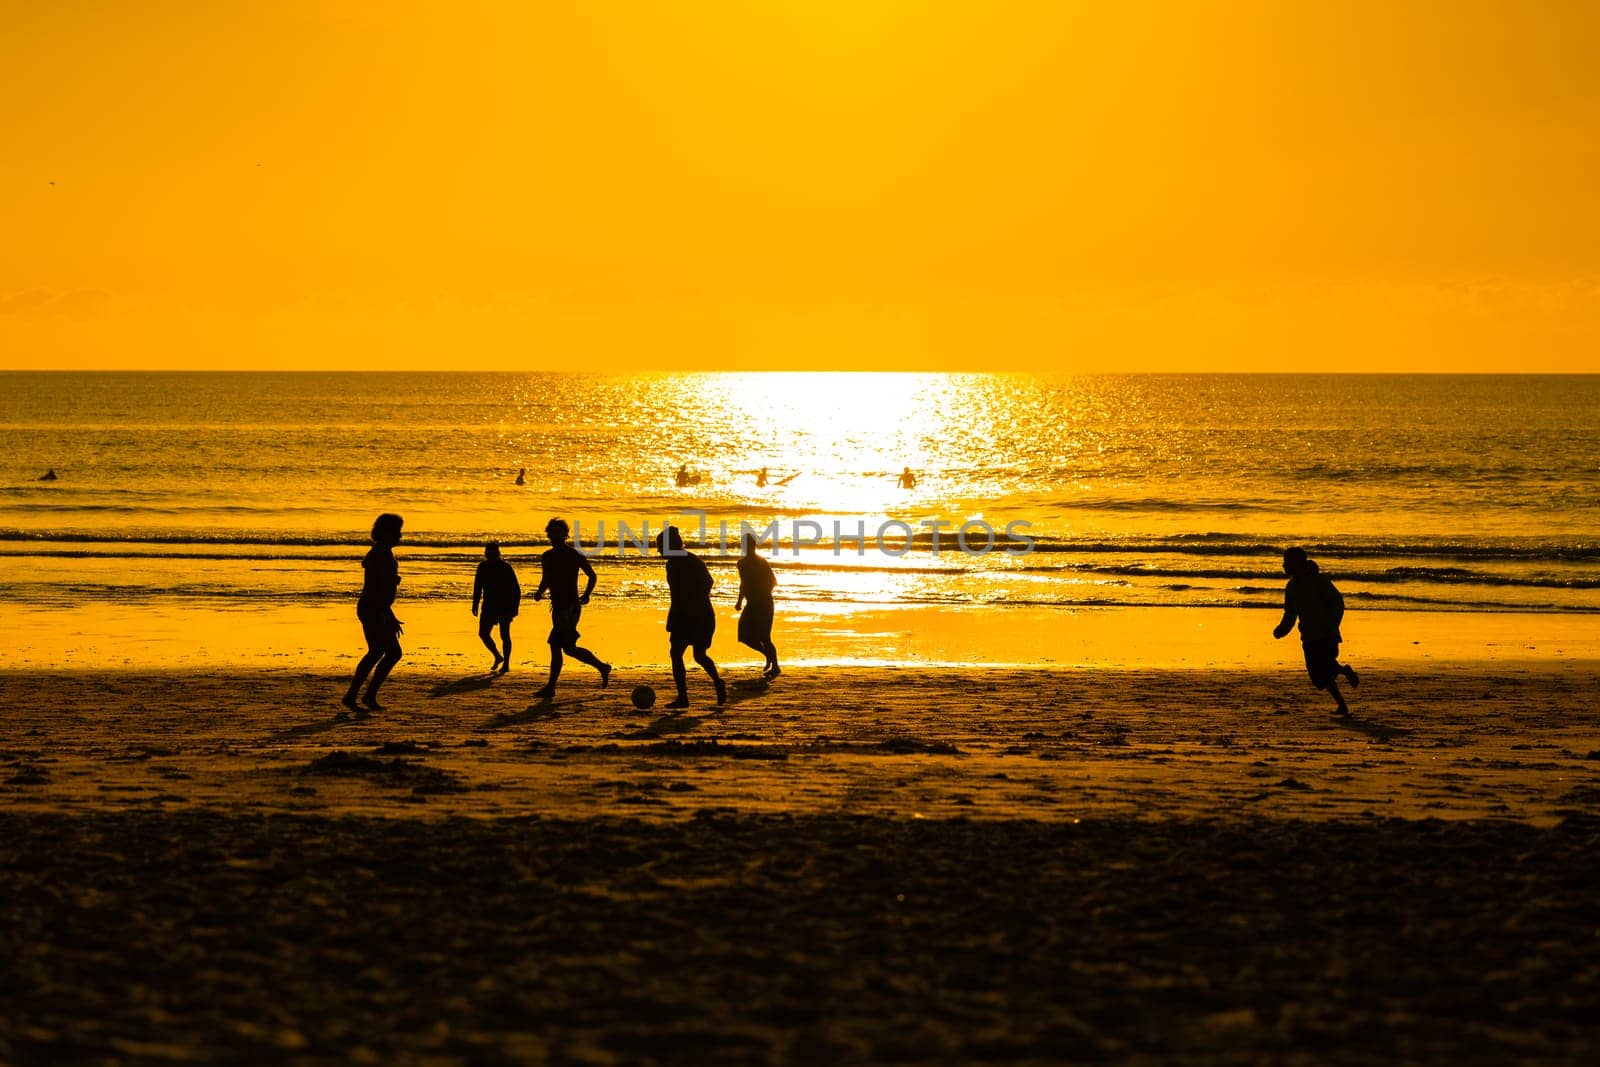 A group of people playing football on a beach